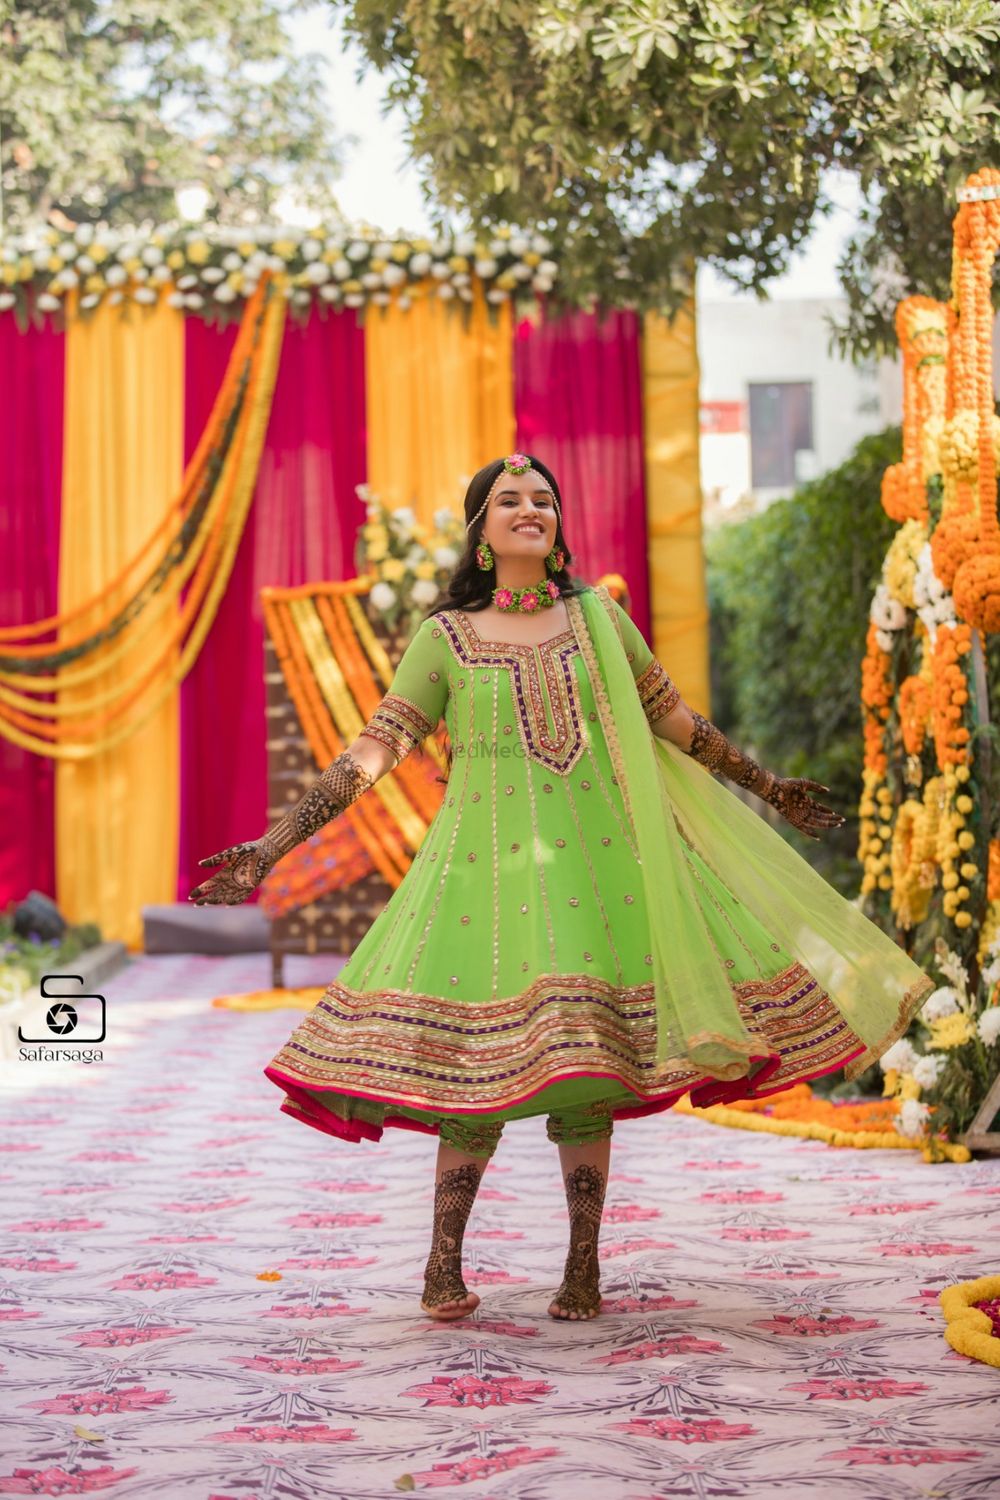 Photo of A bride in a green mehndi outfit twirling in happiness